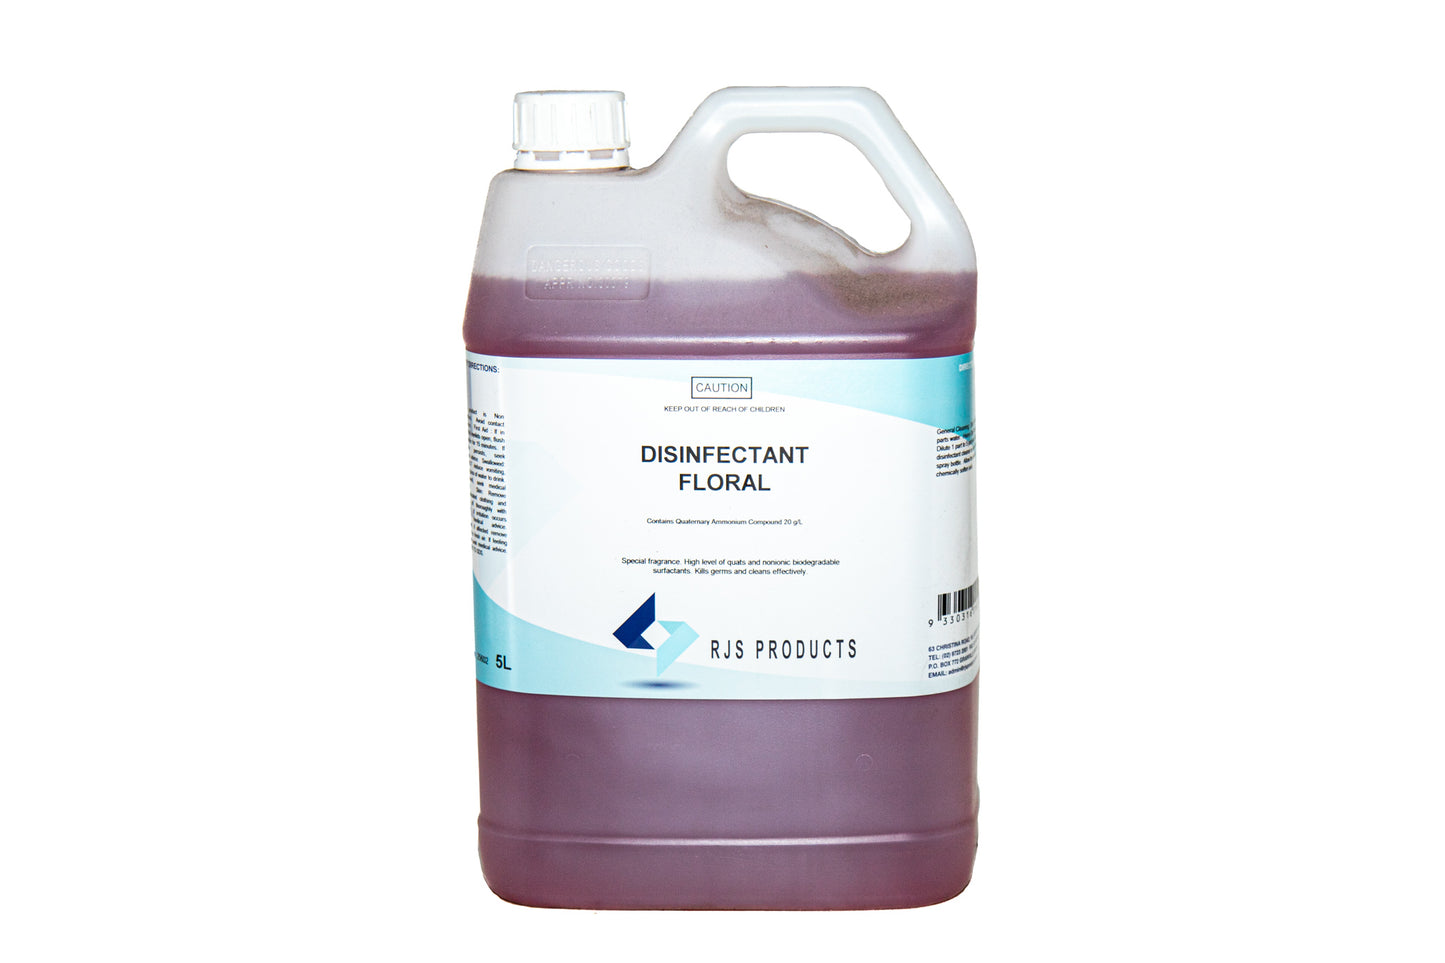 Disinfectant Floral